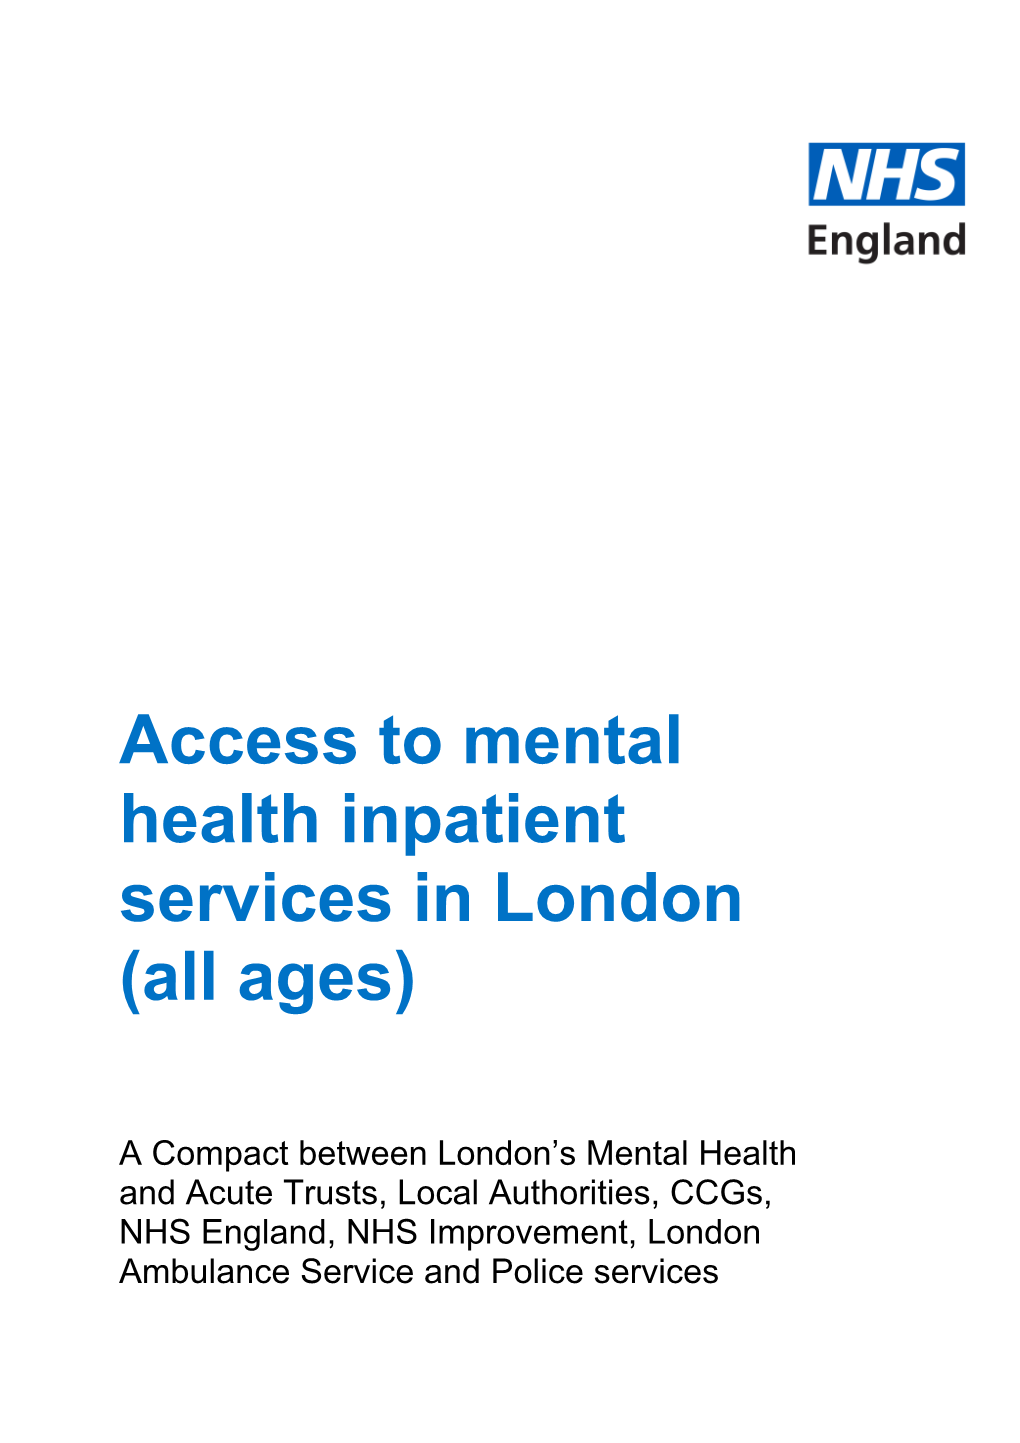 Access to Mental Health Inpatient Services in London (All Ages)